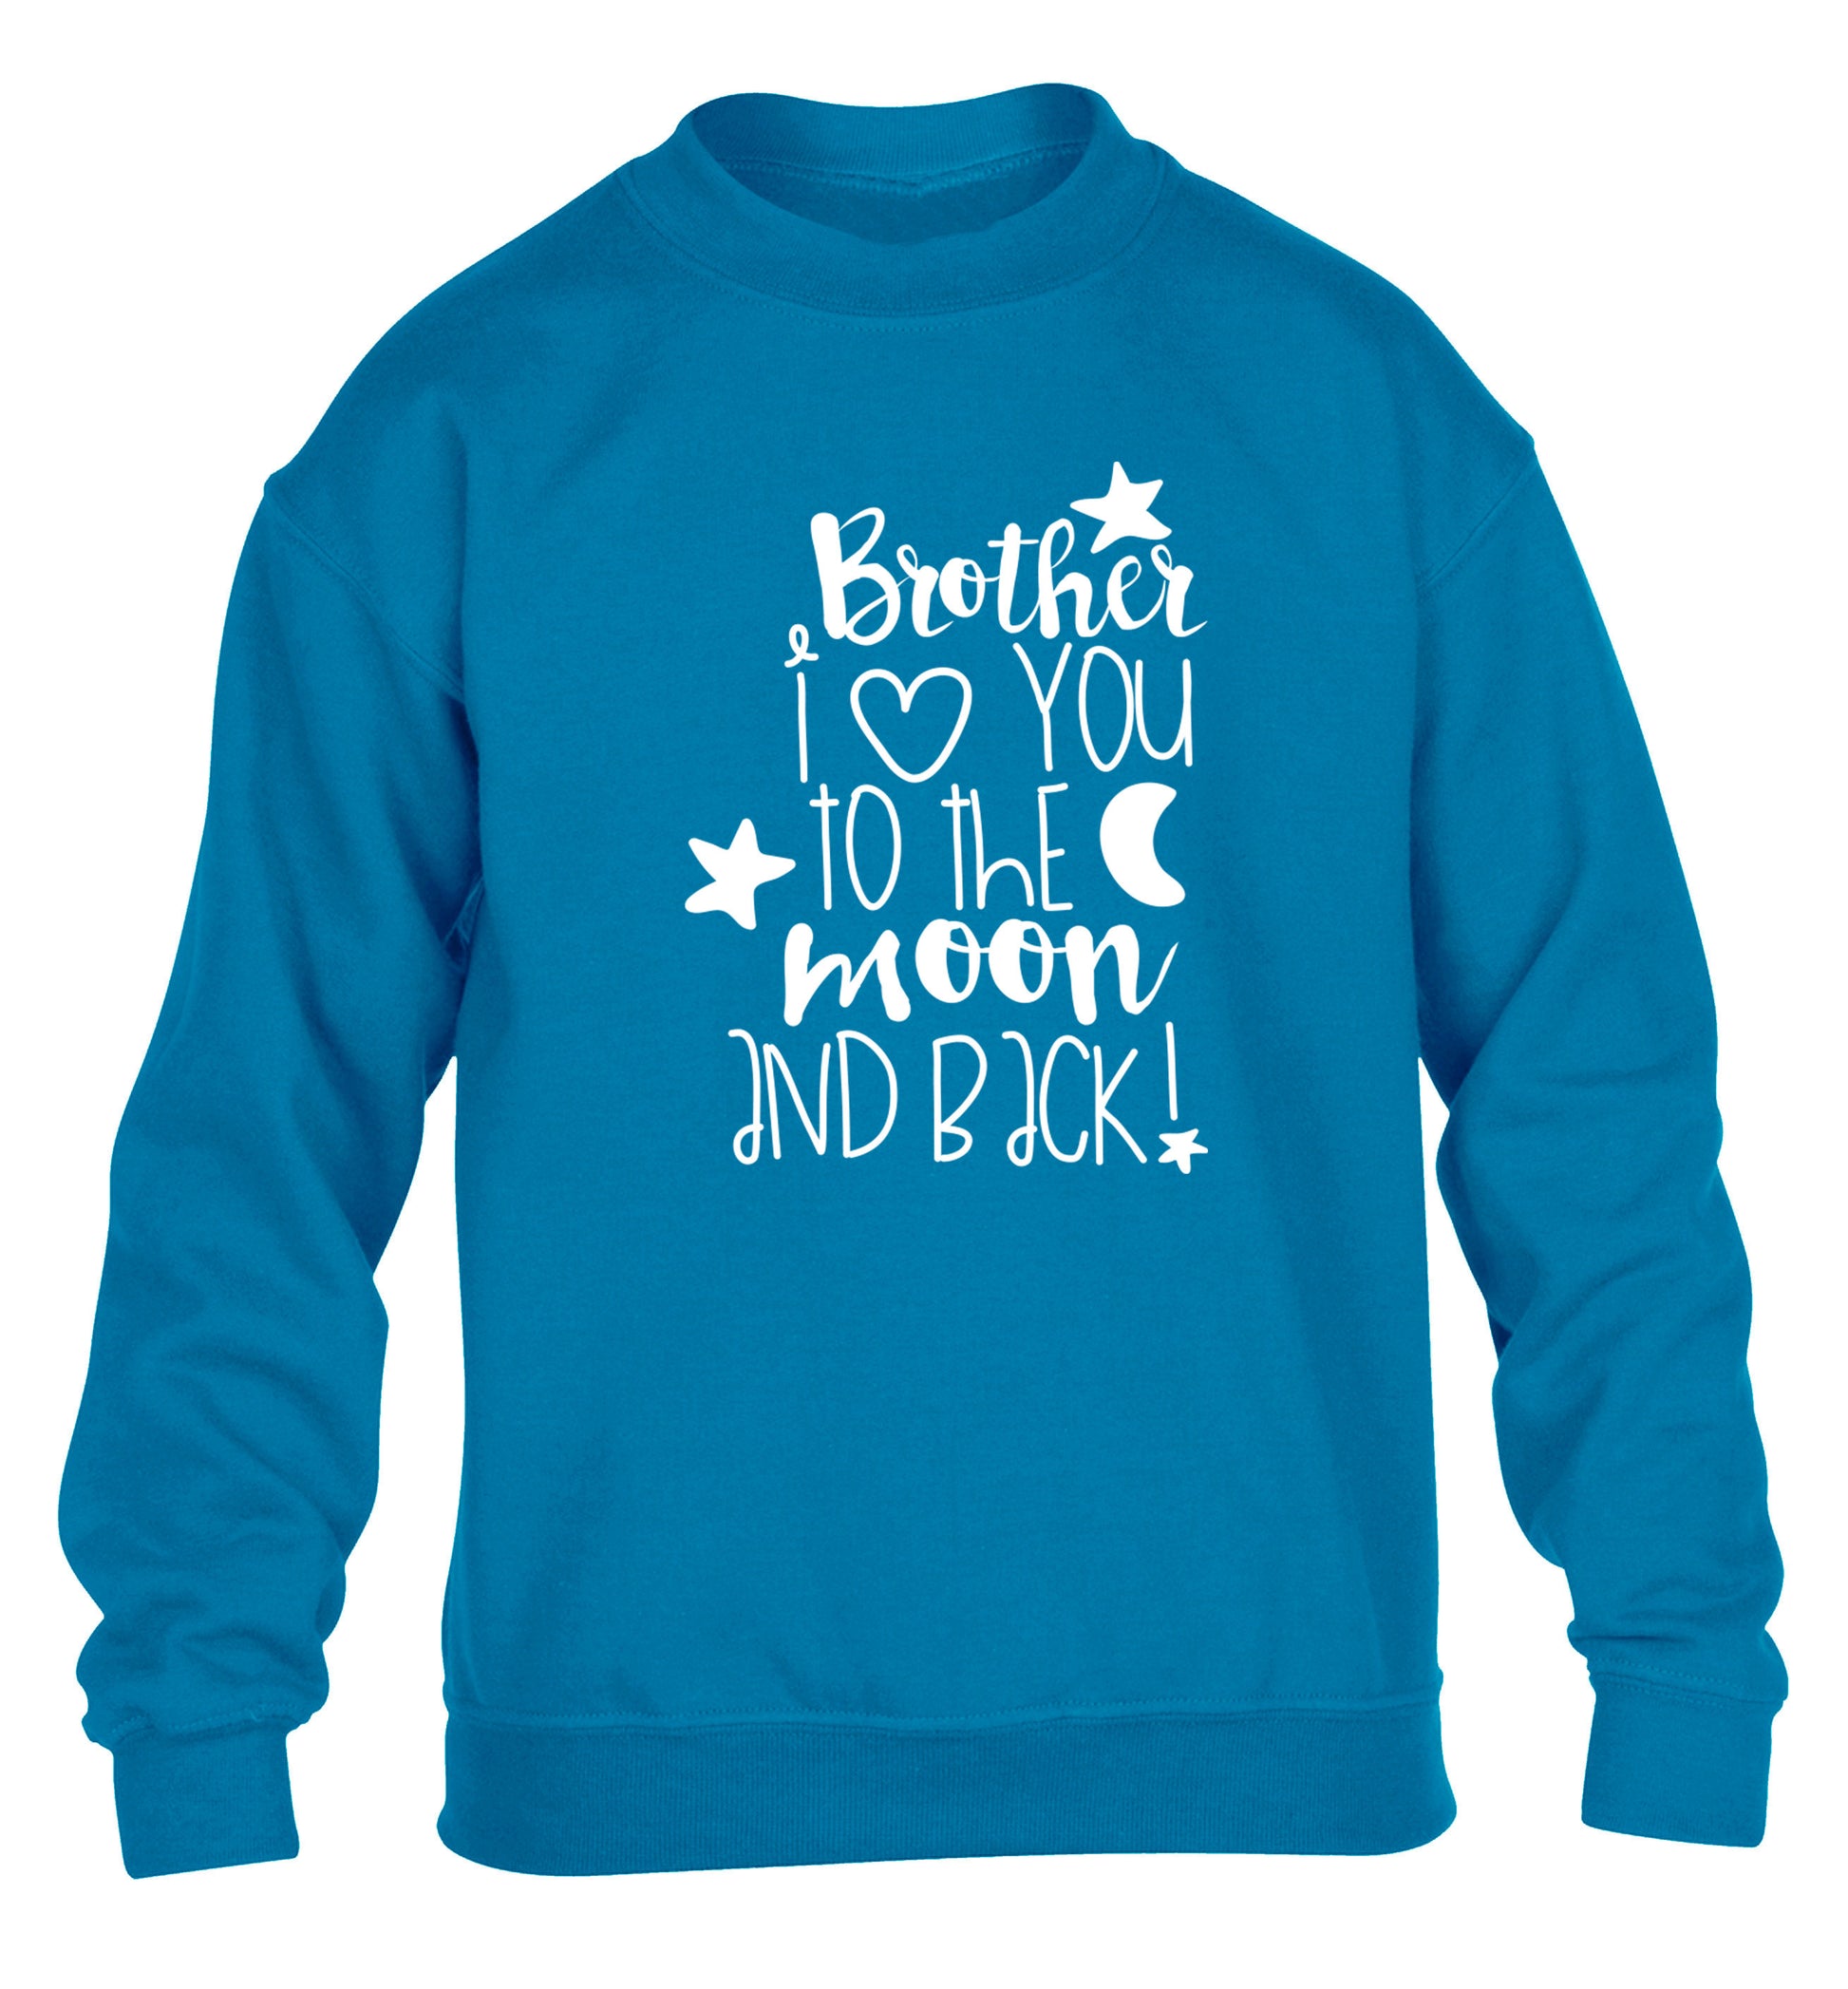 Brother I love you to the moon and back children's blue  sweater 12-14 Years